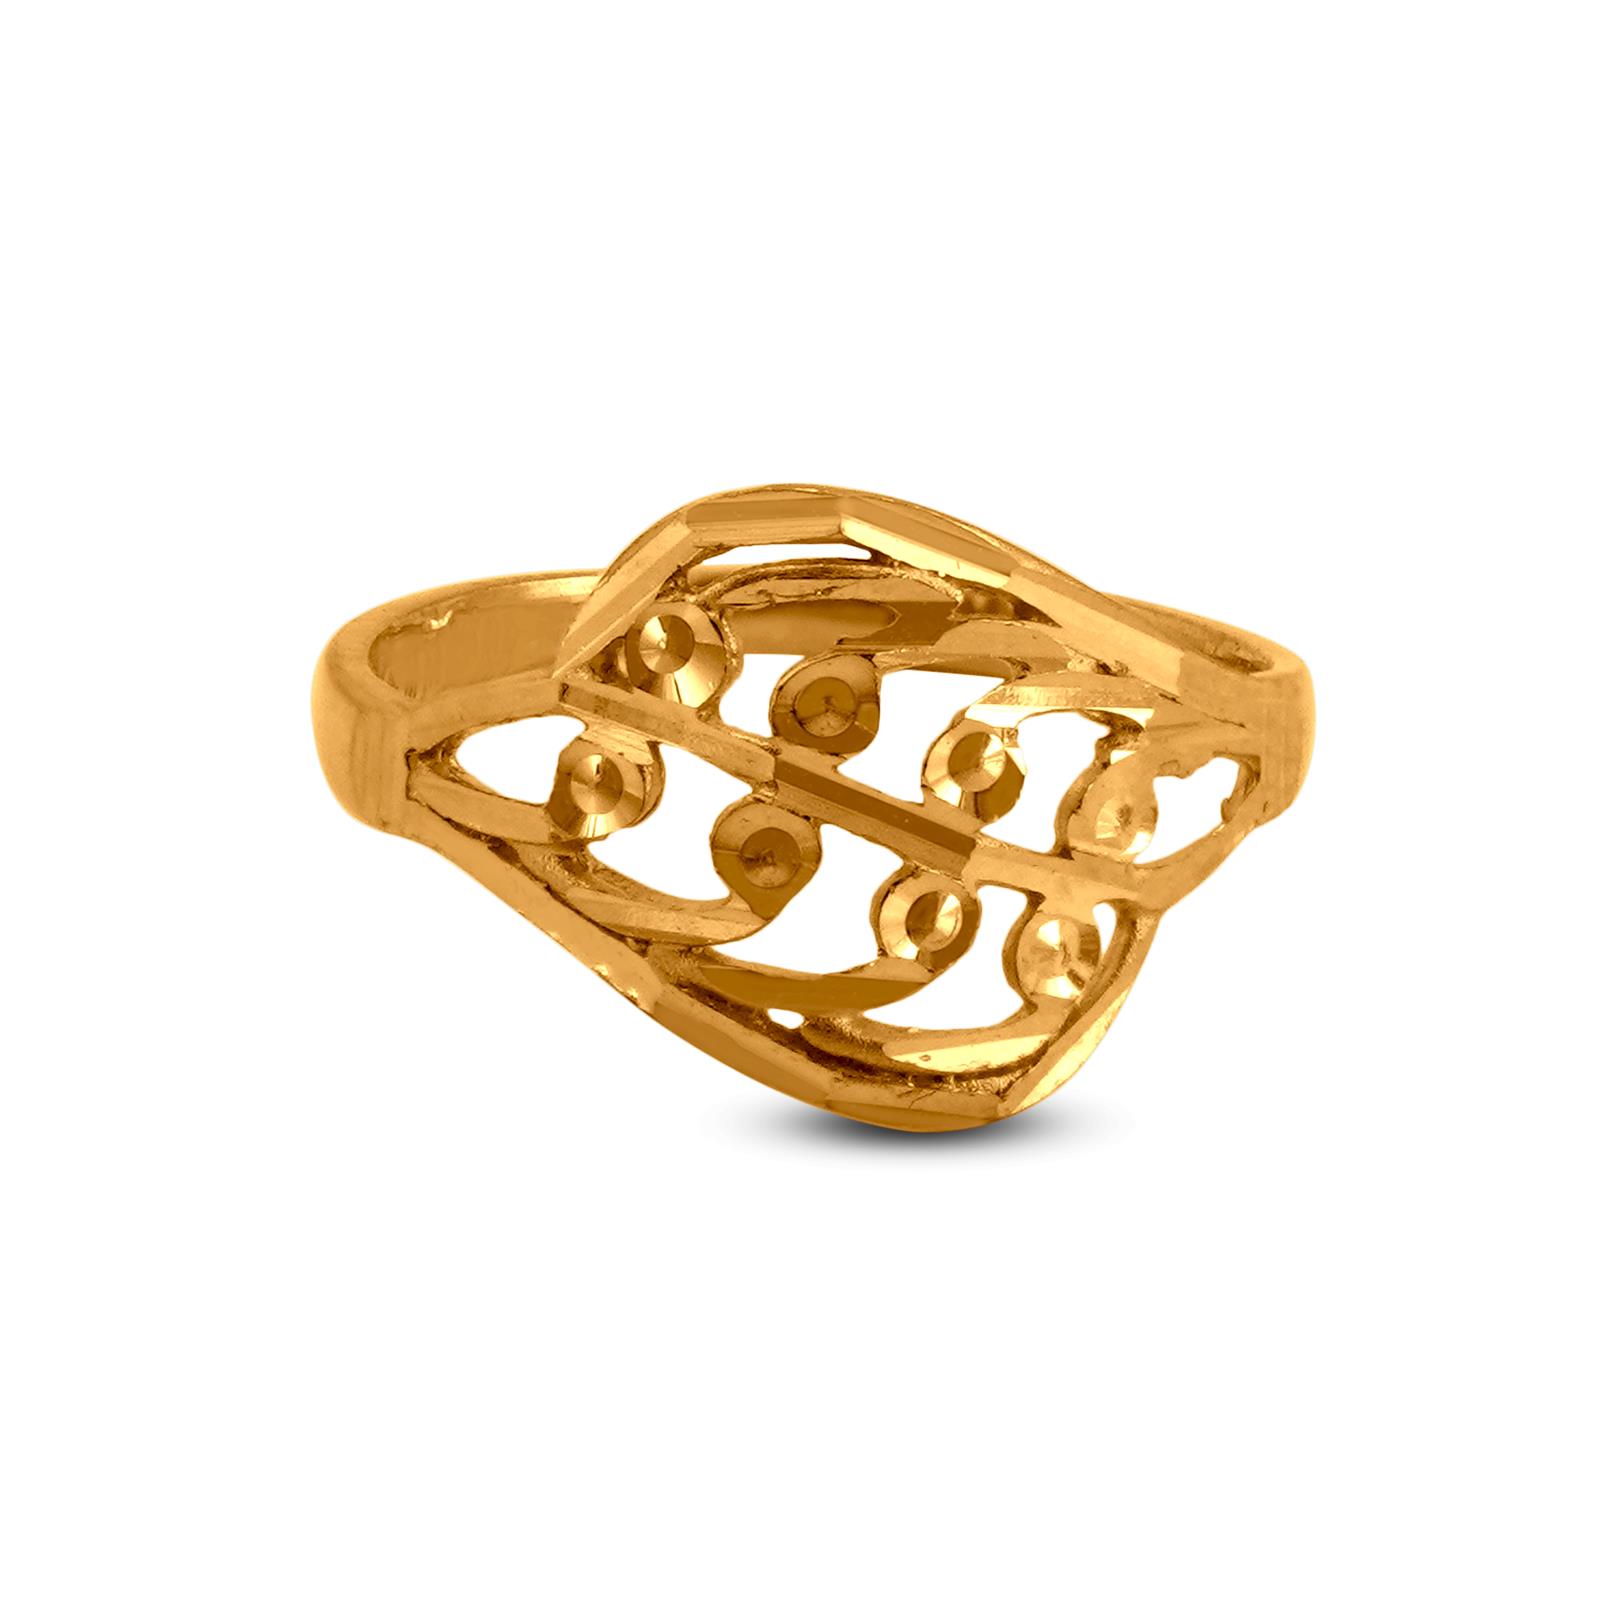 22K Mens fancy Gold Ring - AjRi58183 - 22Kt Gold Men's Ring with linear  design & frost finish.